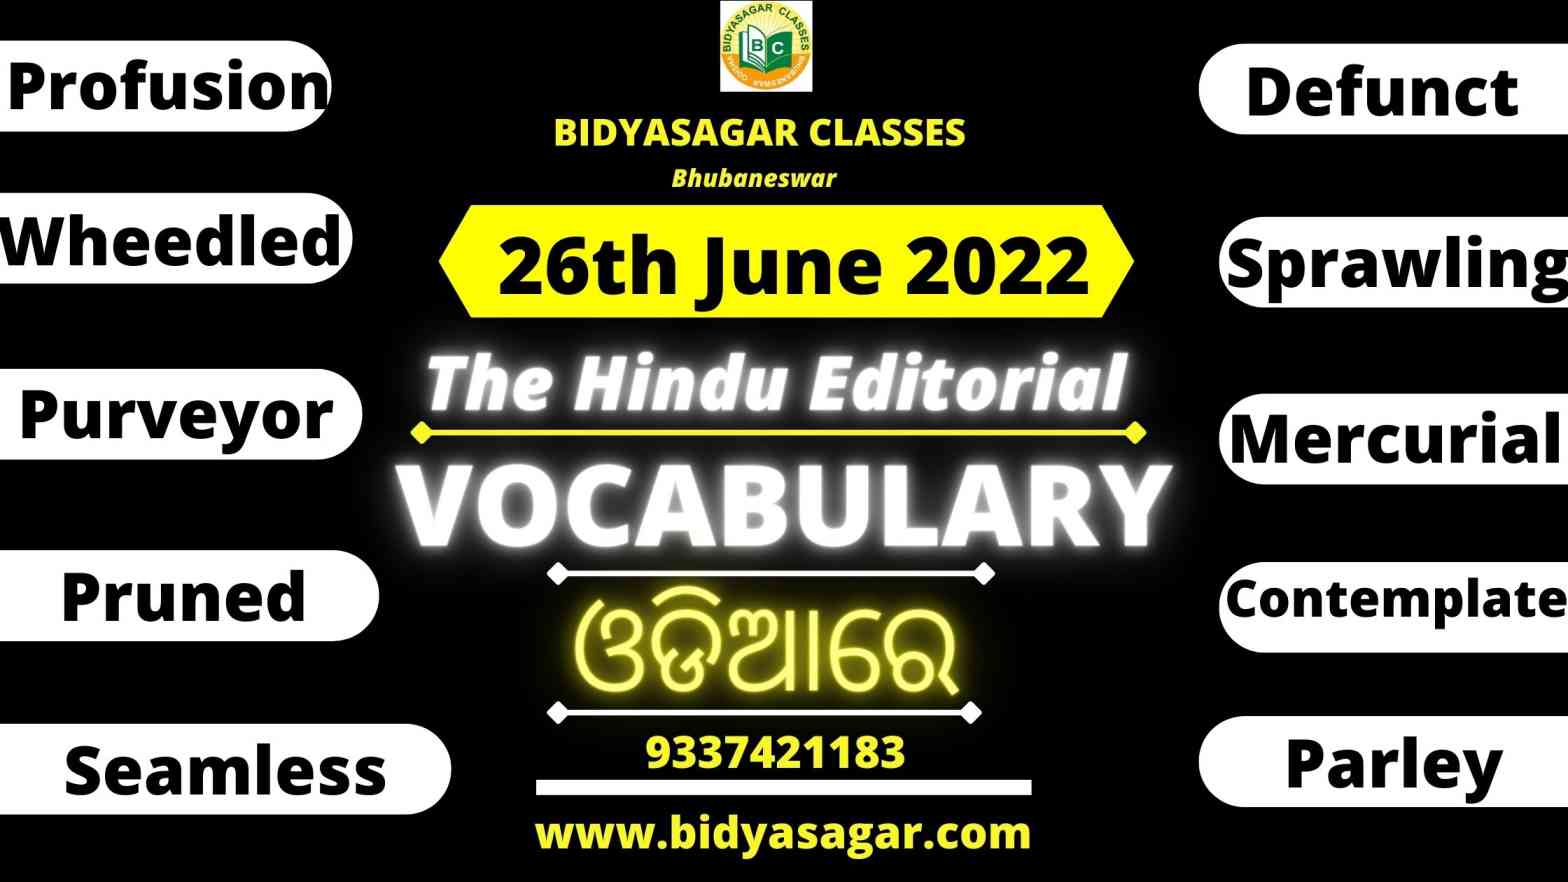 The Hindu Editorial Vocabulary of 26th June 2022